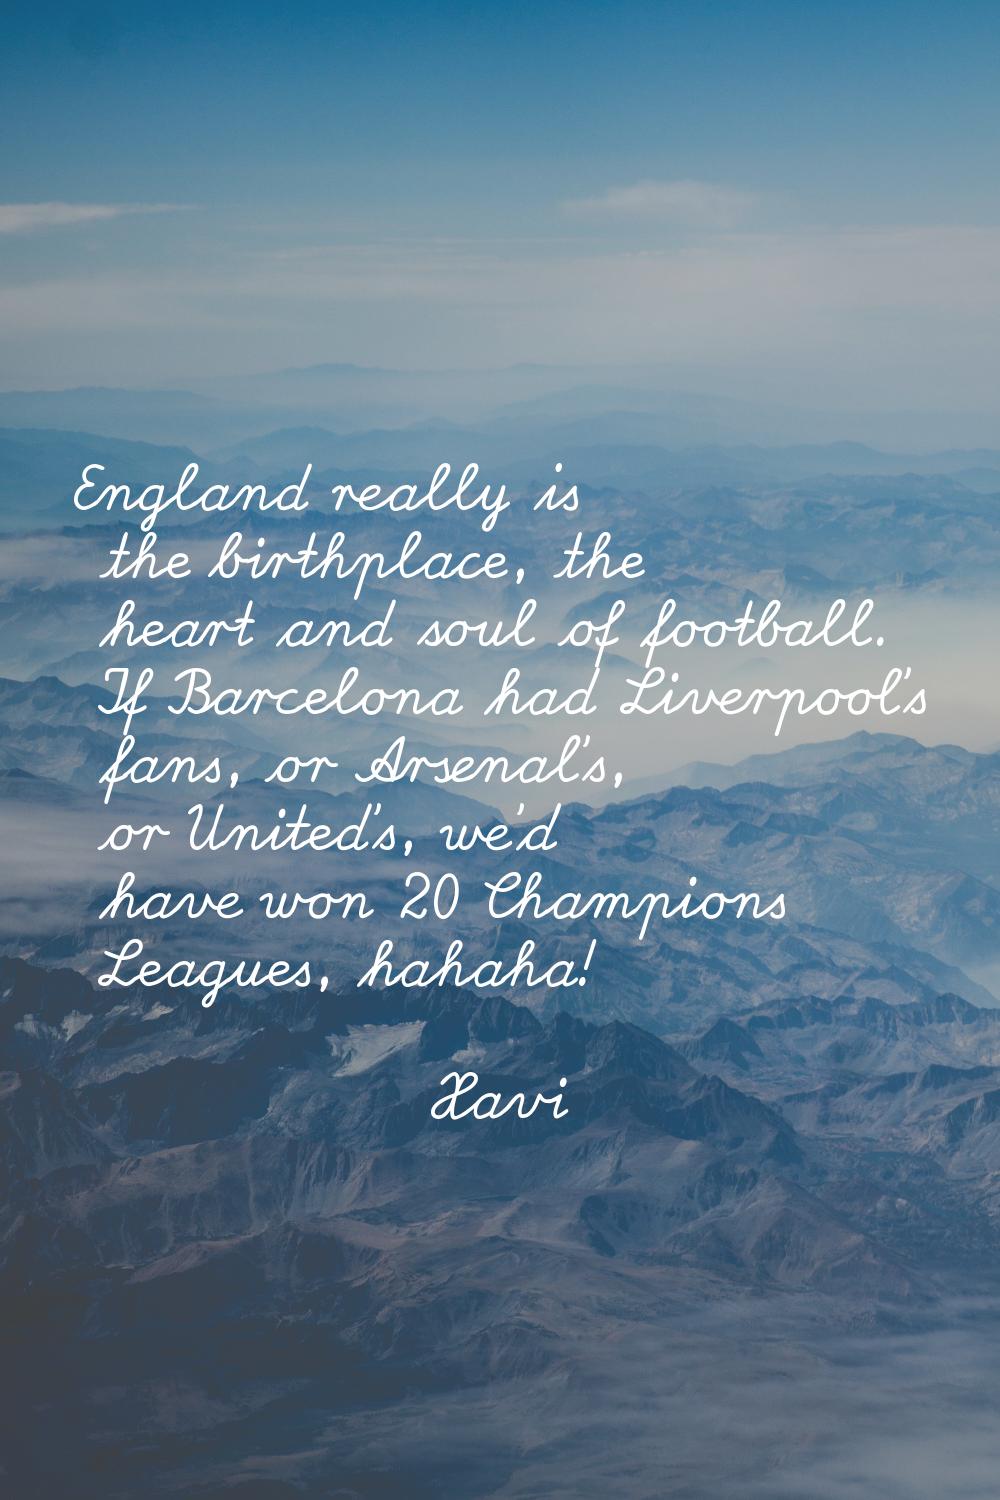 England really is the birthplace, the heart and soul of football. If Barcelona had Liverpool's fans